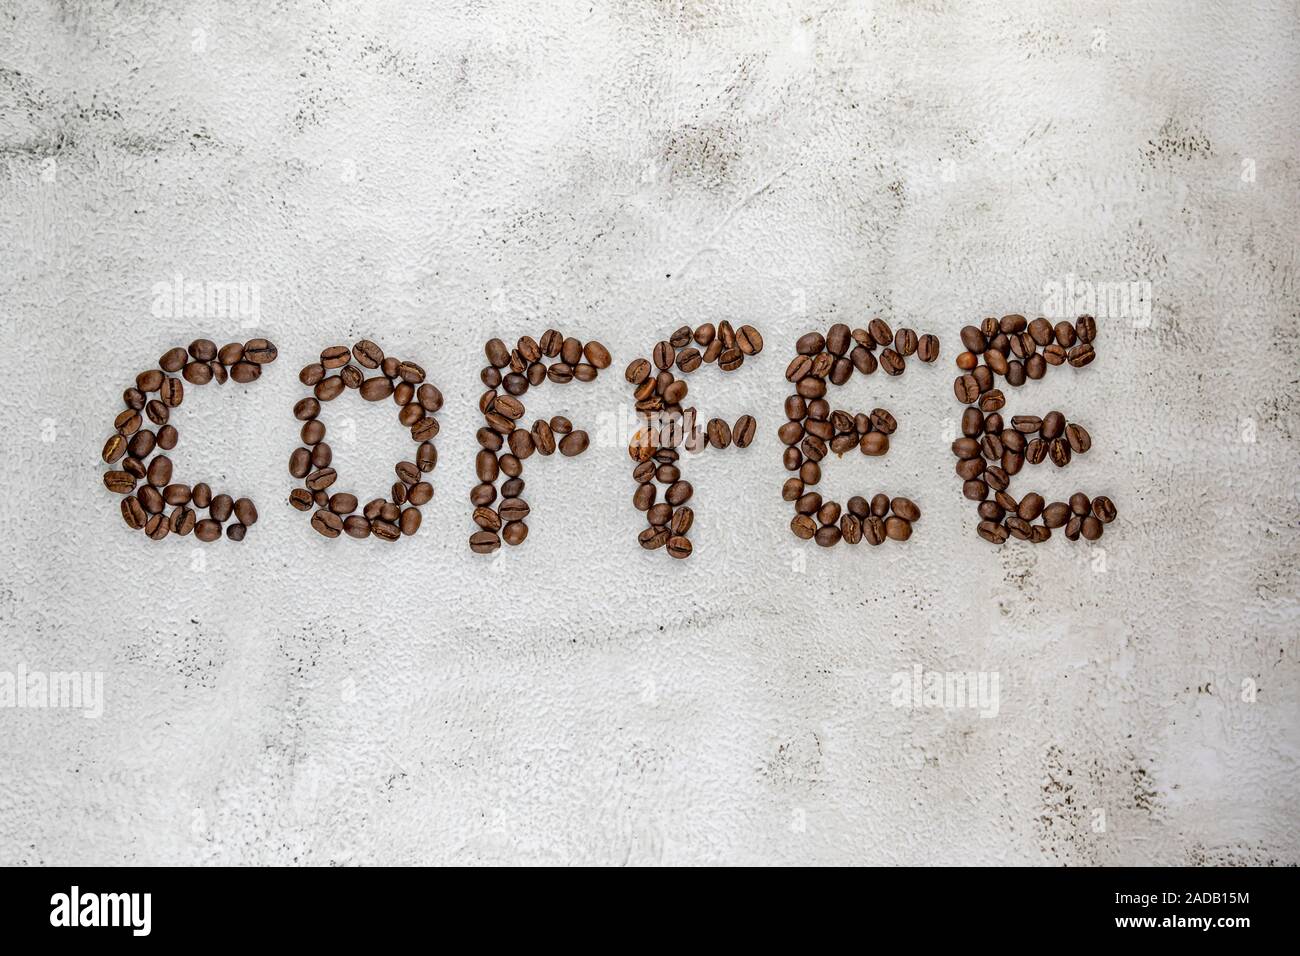 Light textured background image with coffee word written with coffee beans Stock Photo